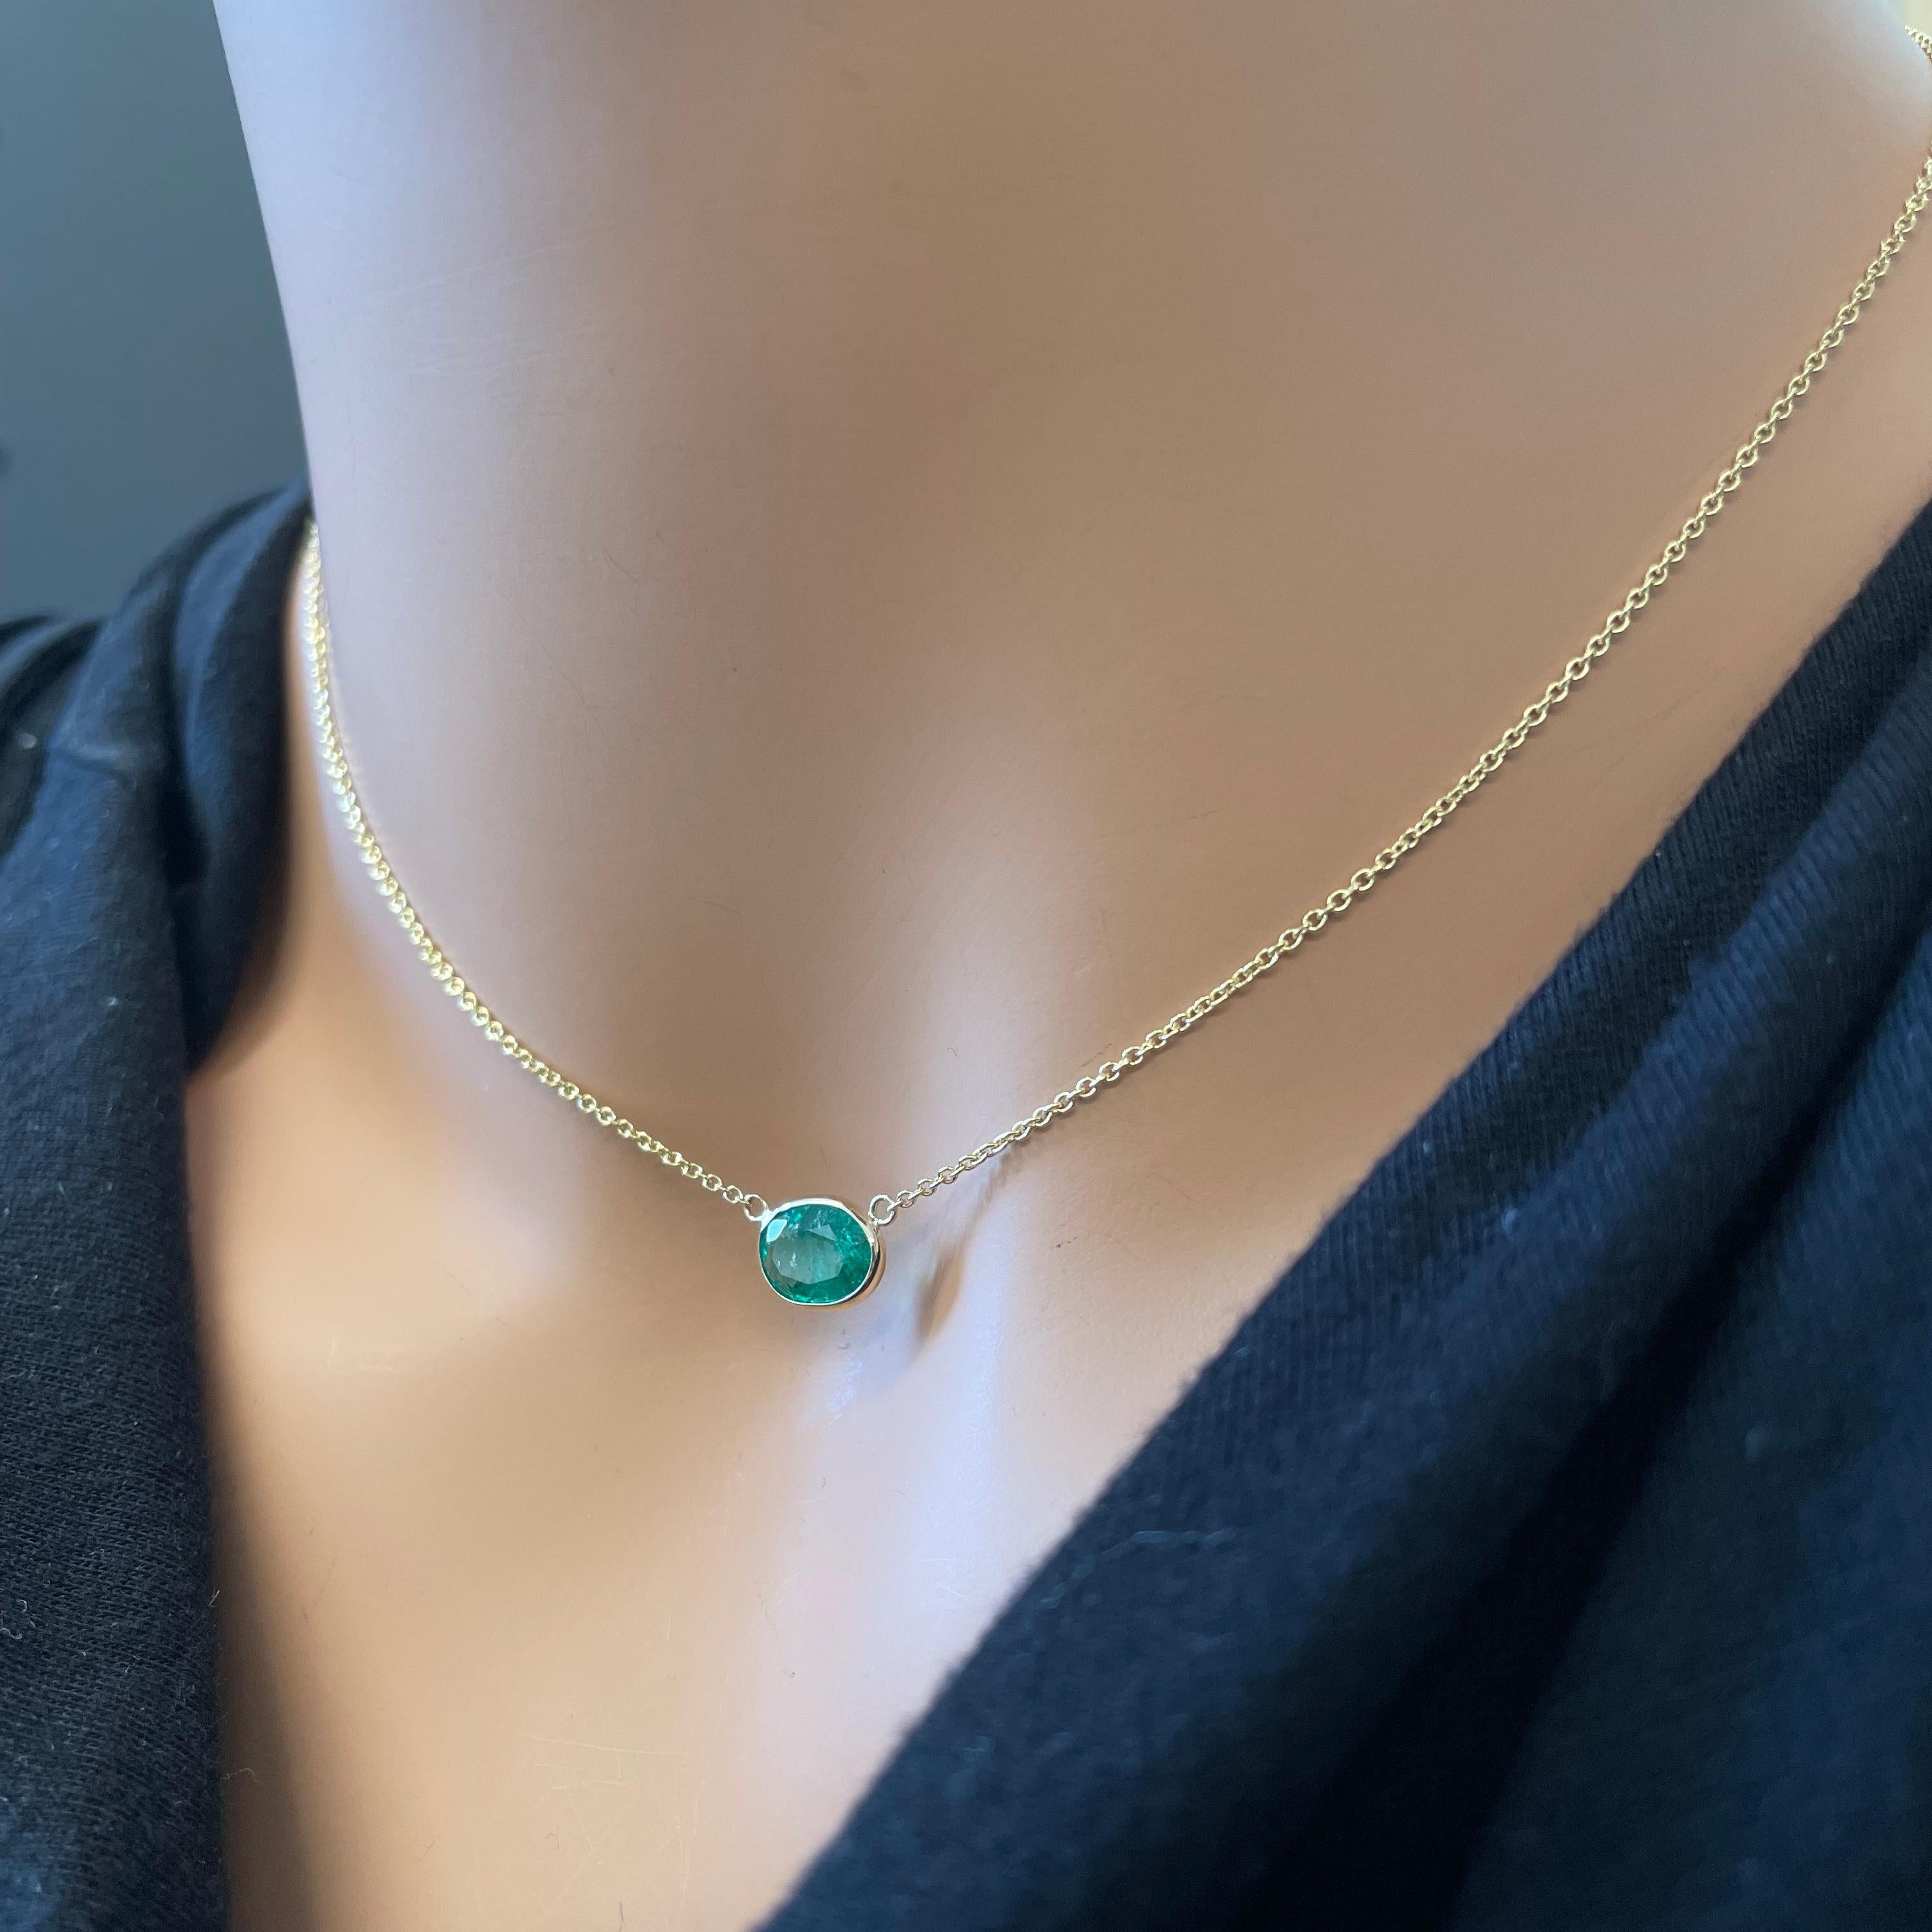 Contemporary 1.61 Carat Green Emerald Oval Cut Fashion Necklaces In 14K Yellow Gold For Sale